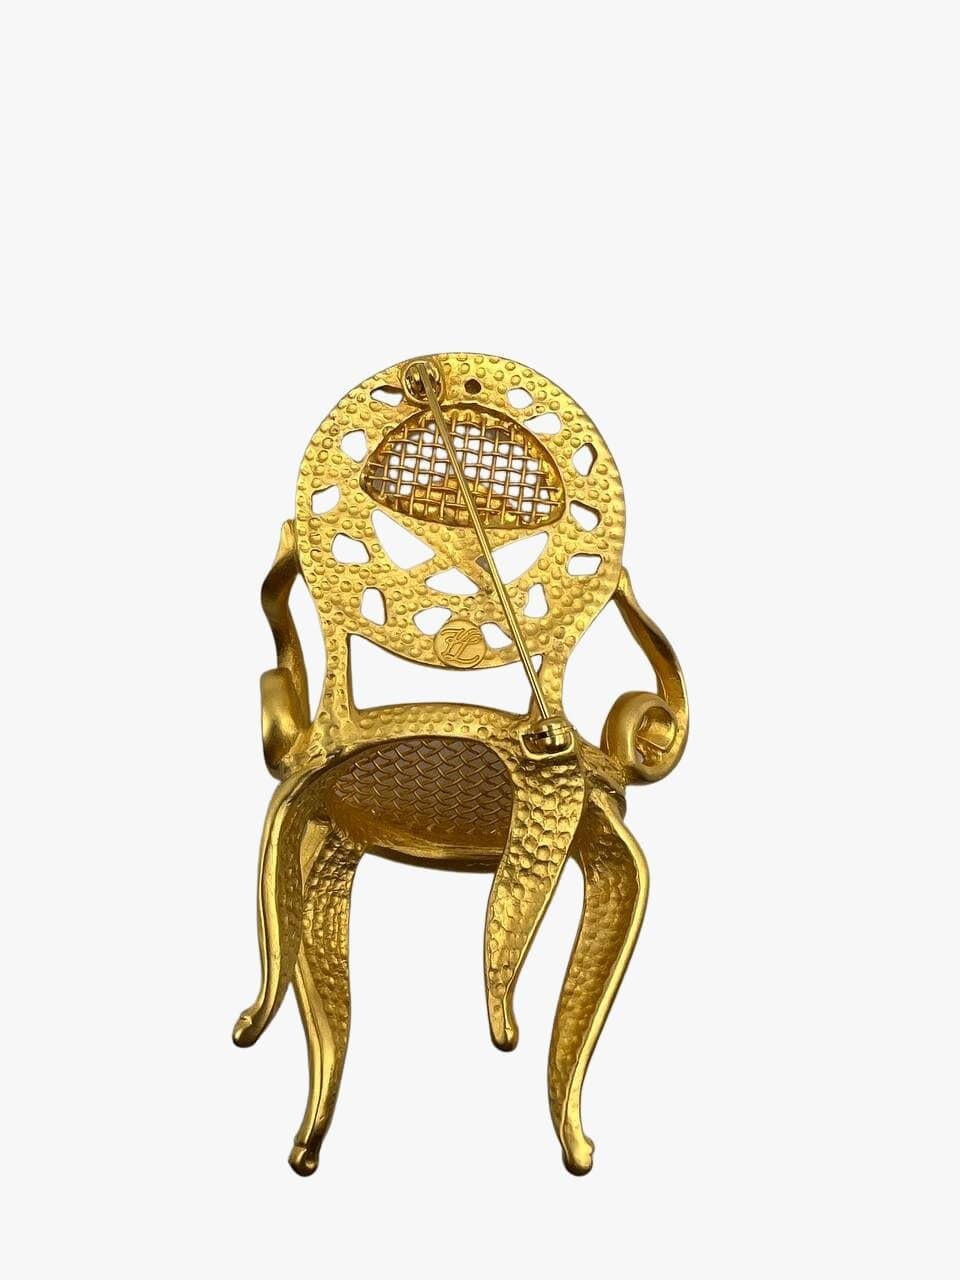 Vintage Karl Lagerfeld 24k gold plated brooch featuring a chair in the style of Louis XV. The brooch is embossed with Lagerfeld’s iconic fan and KL monogram. 

Signed.

Period: 1980s

Condition: excellent

Size: length: 9cm, width: